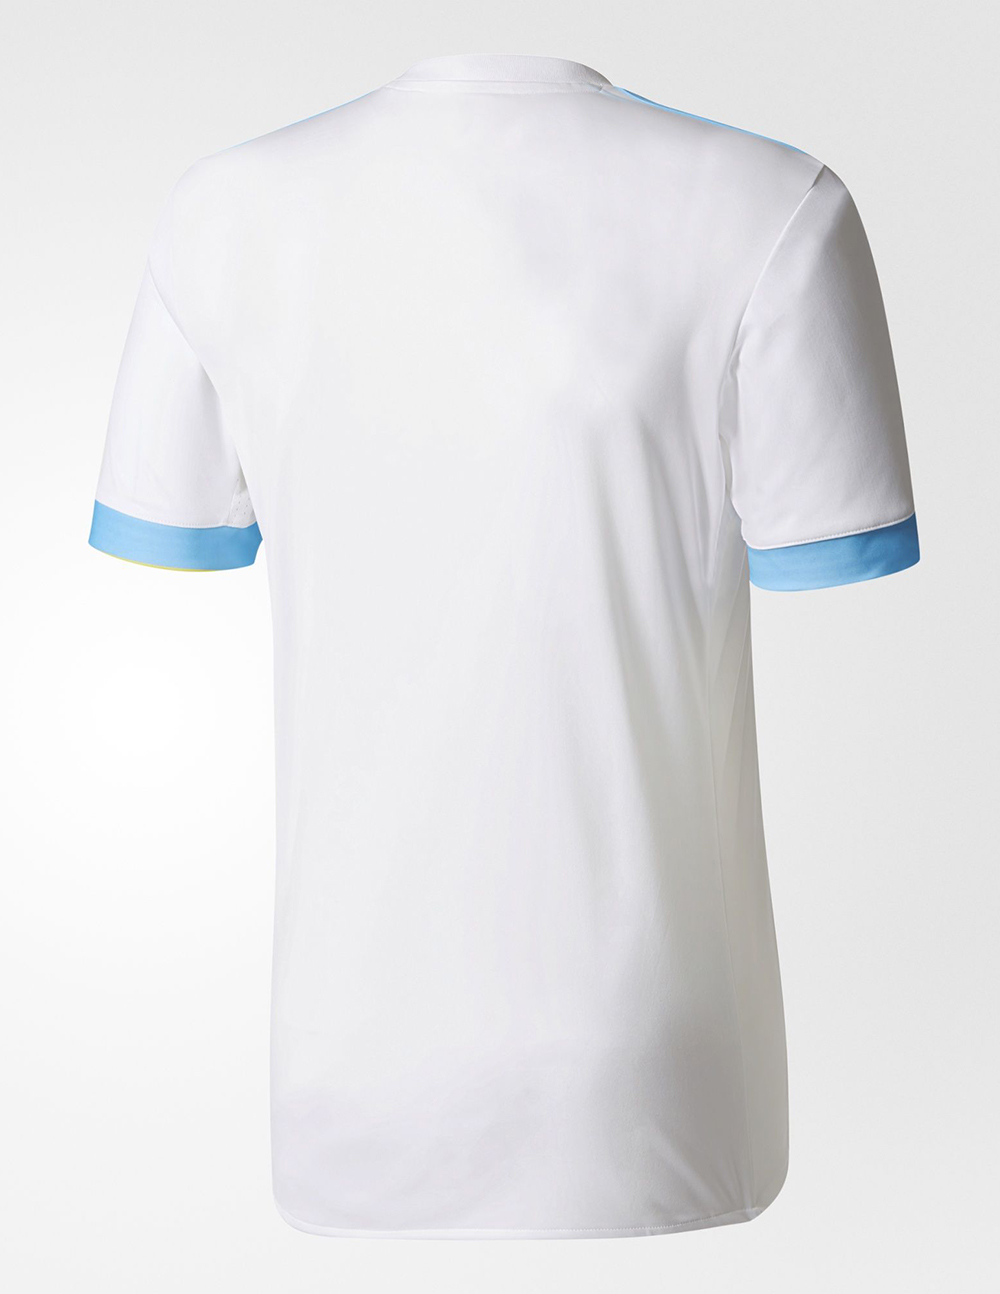 Olympique Marseille adidas Maillots 2017 18 home